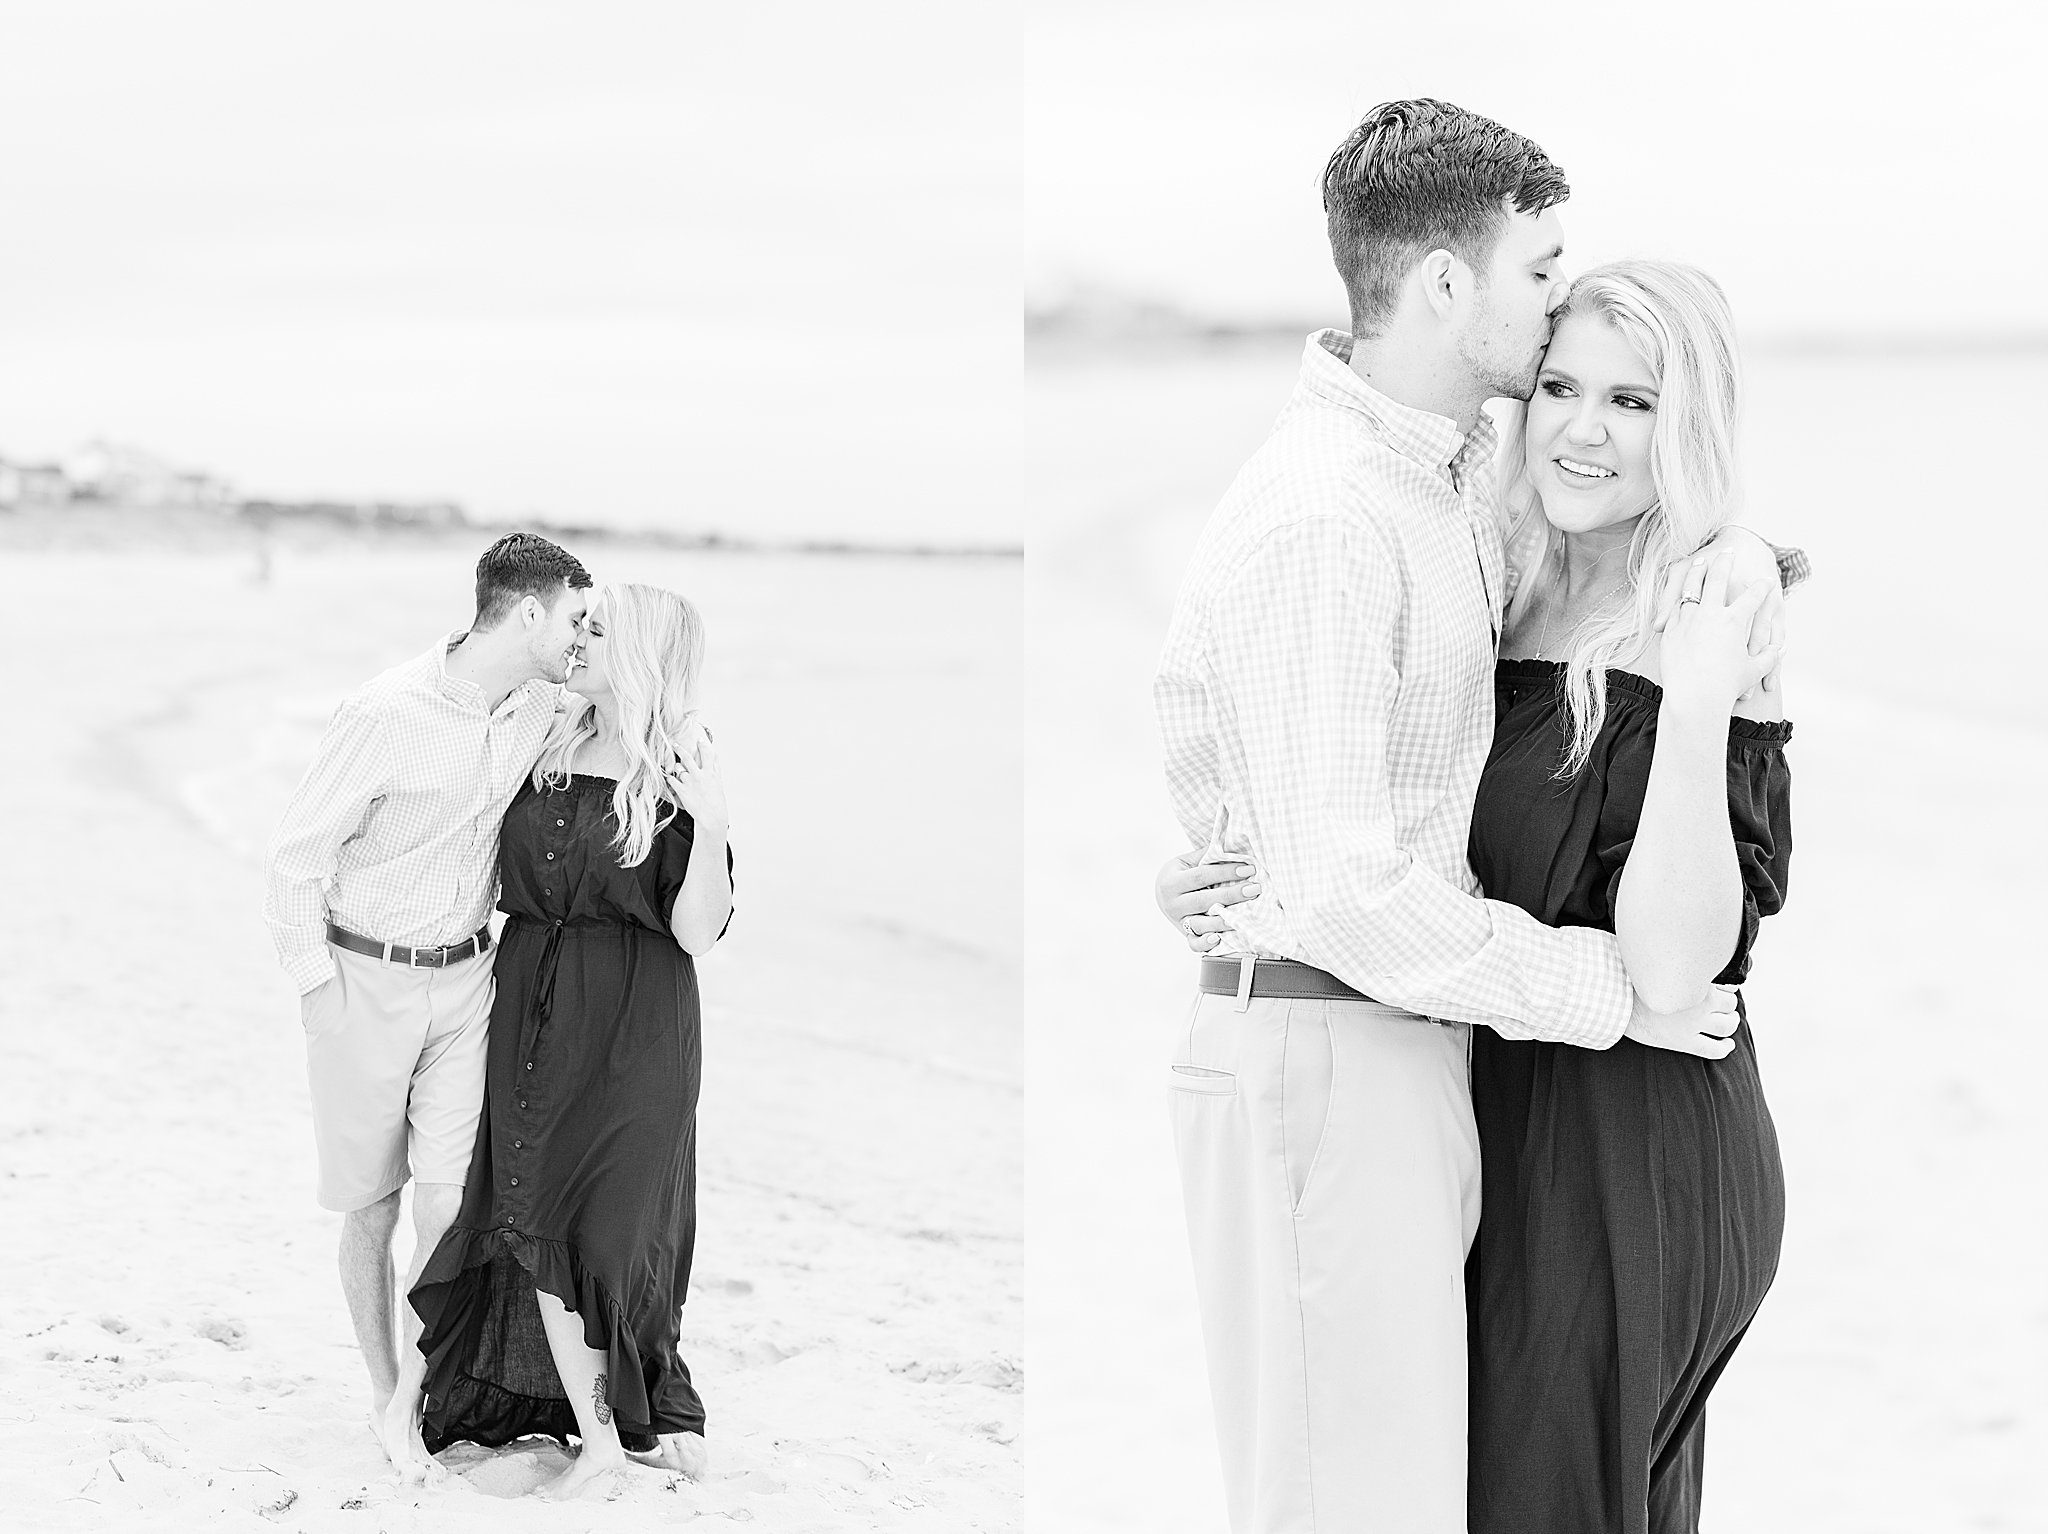 East Beach Engagement Session